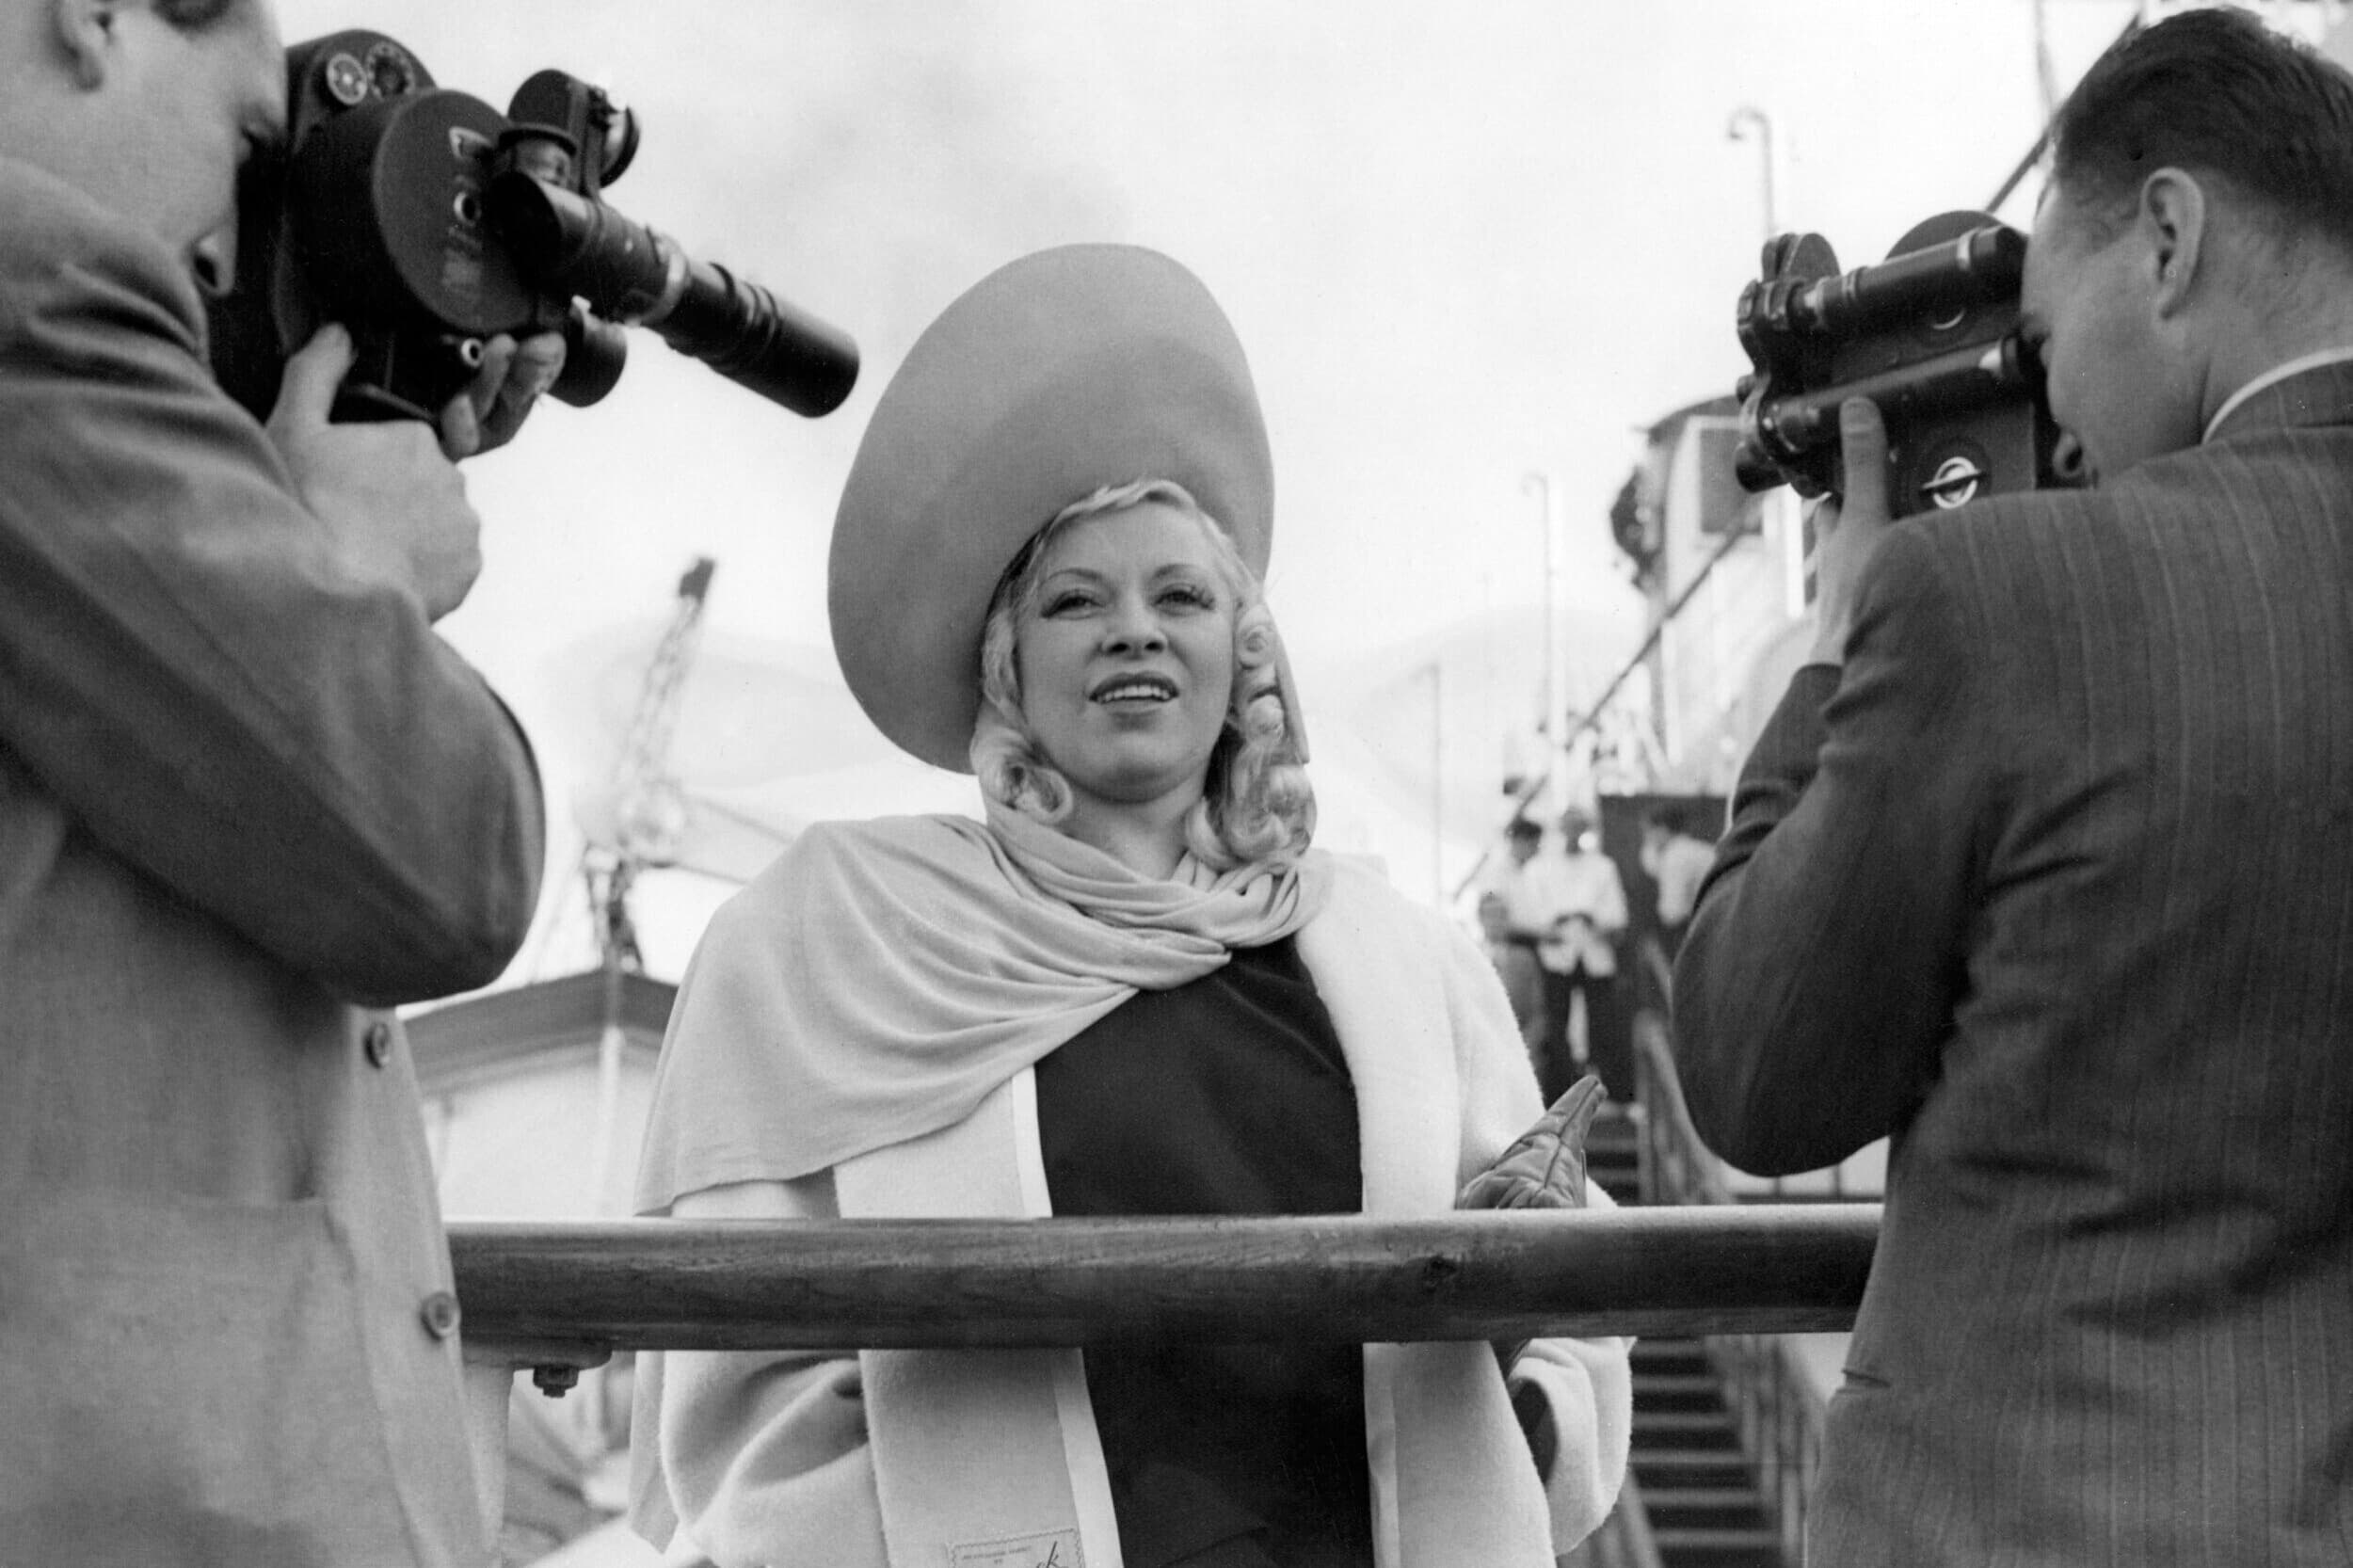 Mae West, who has come to England to star in her first London stage play, her own play Diamond Lil, is seen after her arrival at Southampton on Sept. 17, 1947, aboard the liner Queen Mary from New York.